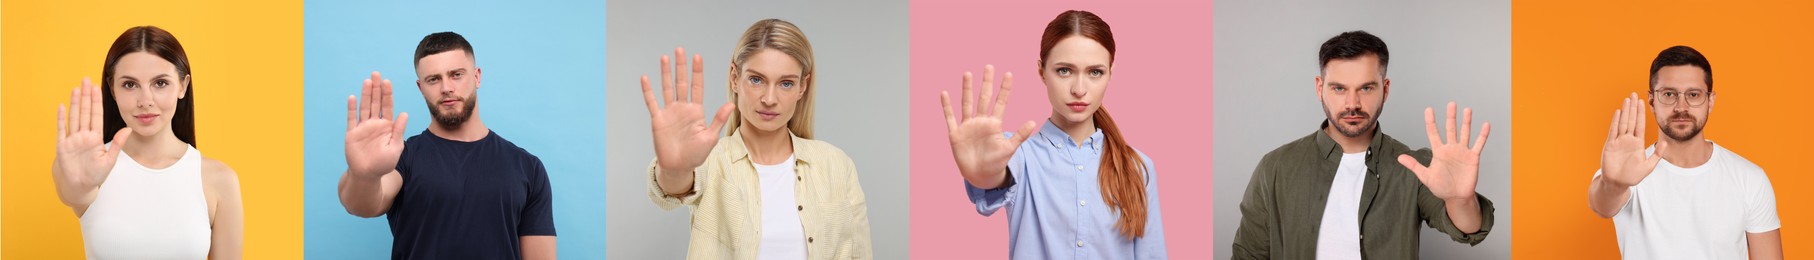 People showing stop gesture on different color backgrounds. Collage with photos